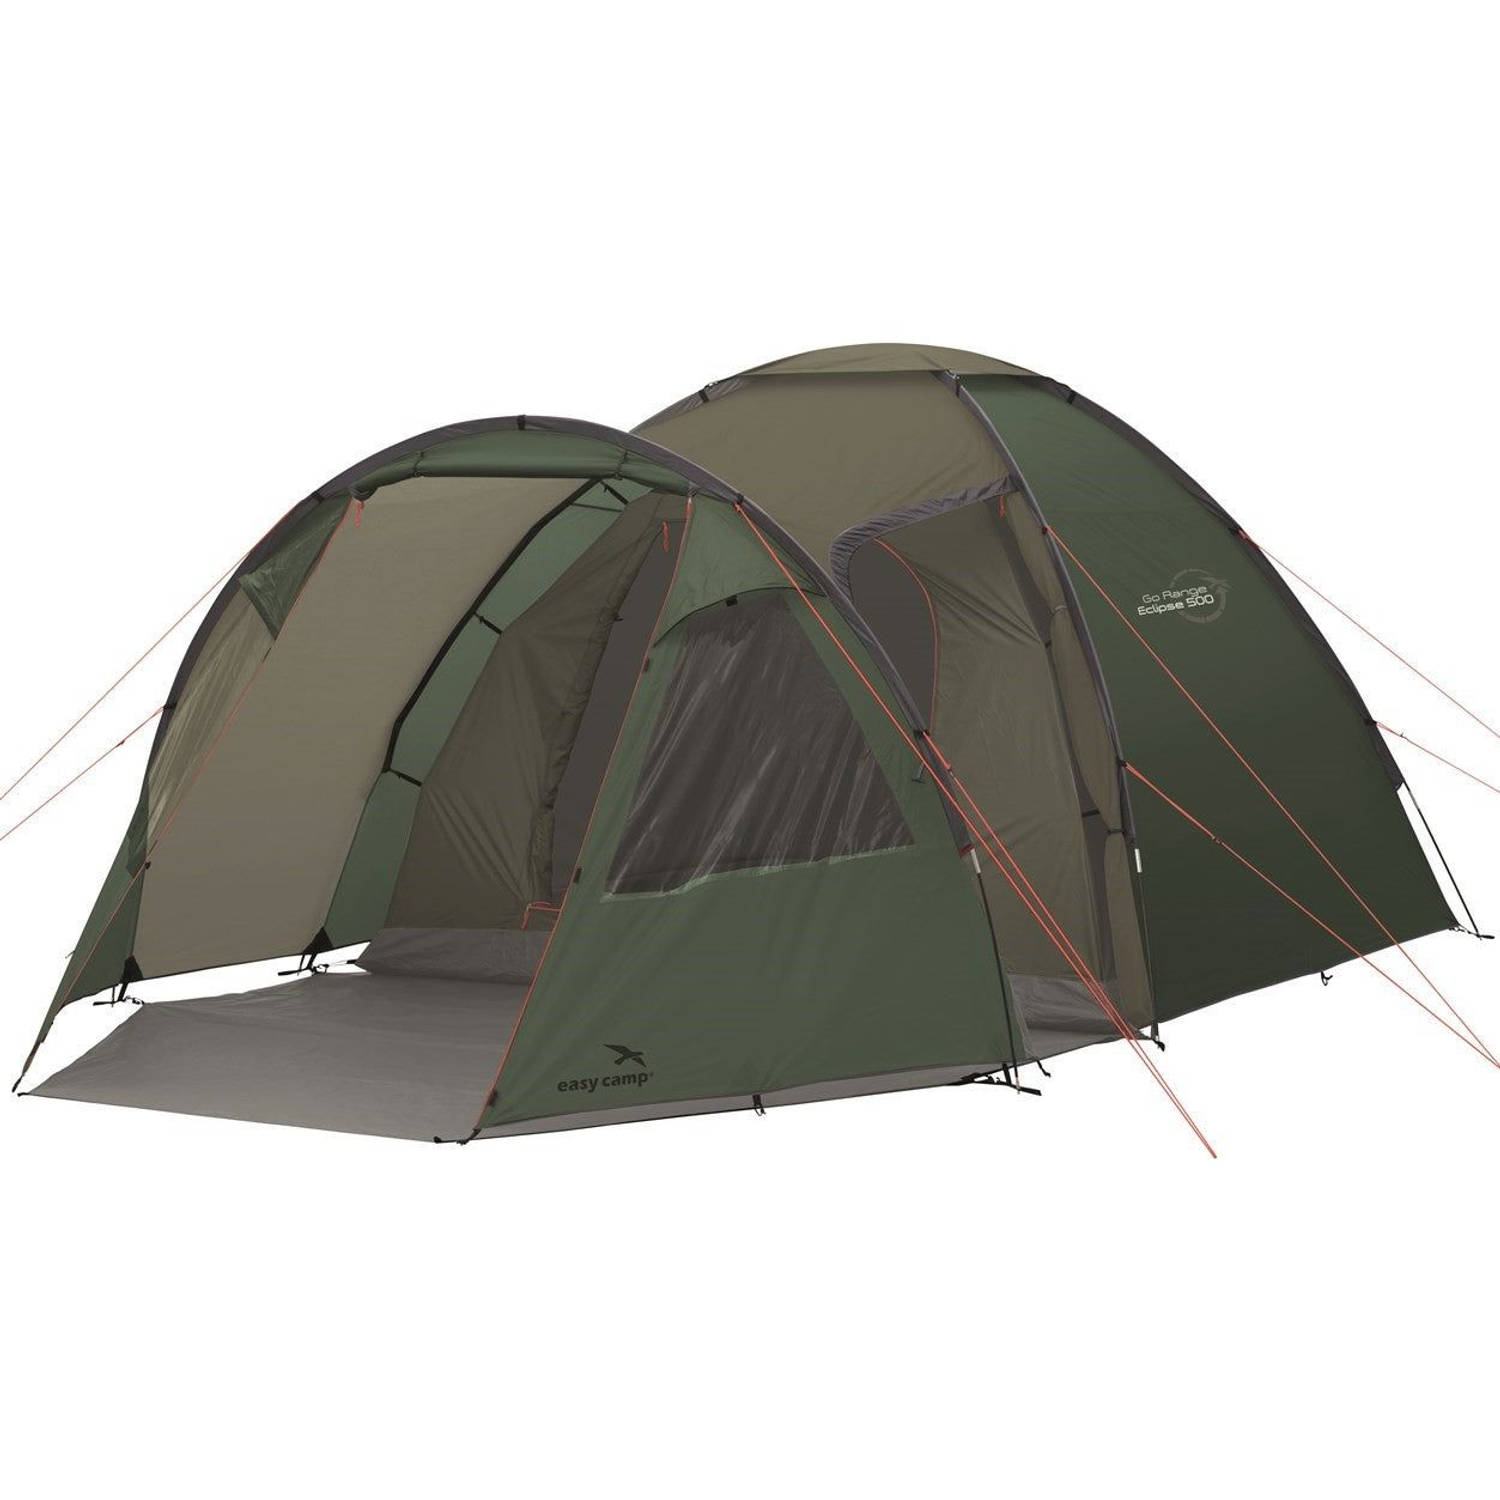 Easy Camp Easy Camp Eclipse 500 tent